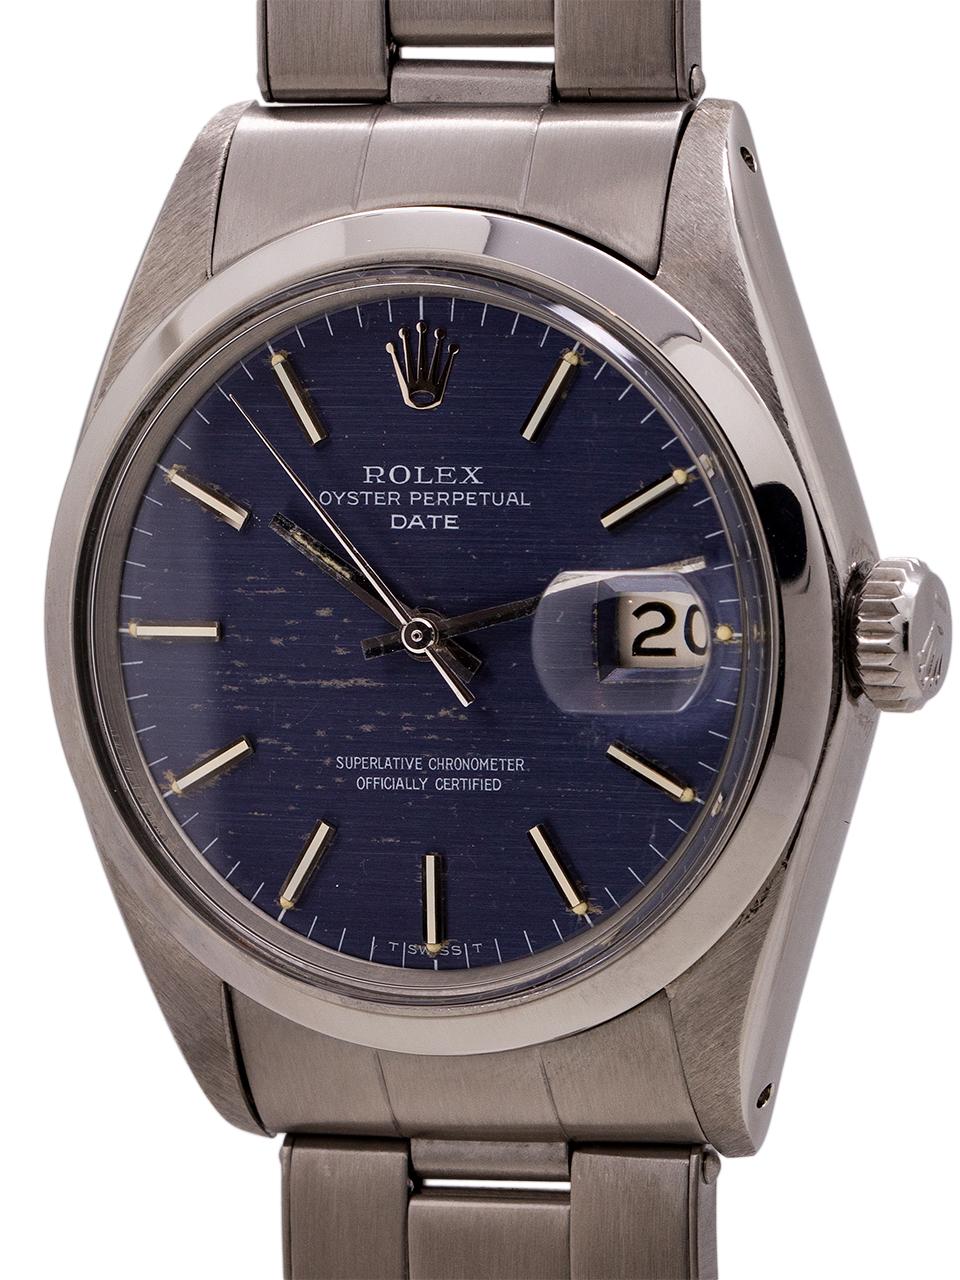 
Rolex Oyster Perpetual Date ref 1500 circa 1967. Featuring 34mm diameter case with smooth bezel, acrylic crystal, and original blue “linen” texture dial with applied silver indexes and silver baton hands. Worn on a period correct stainless steel